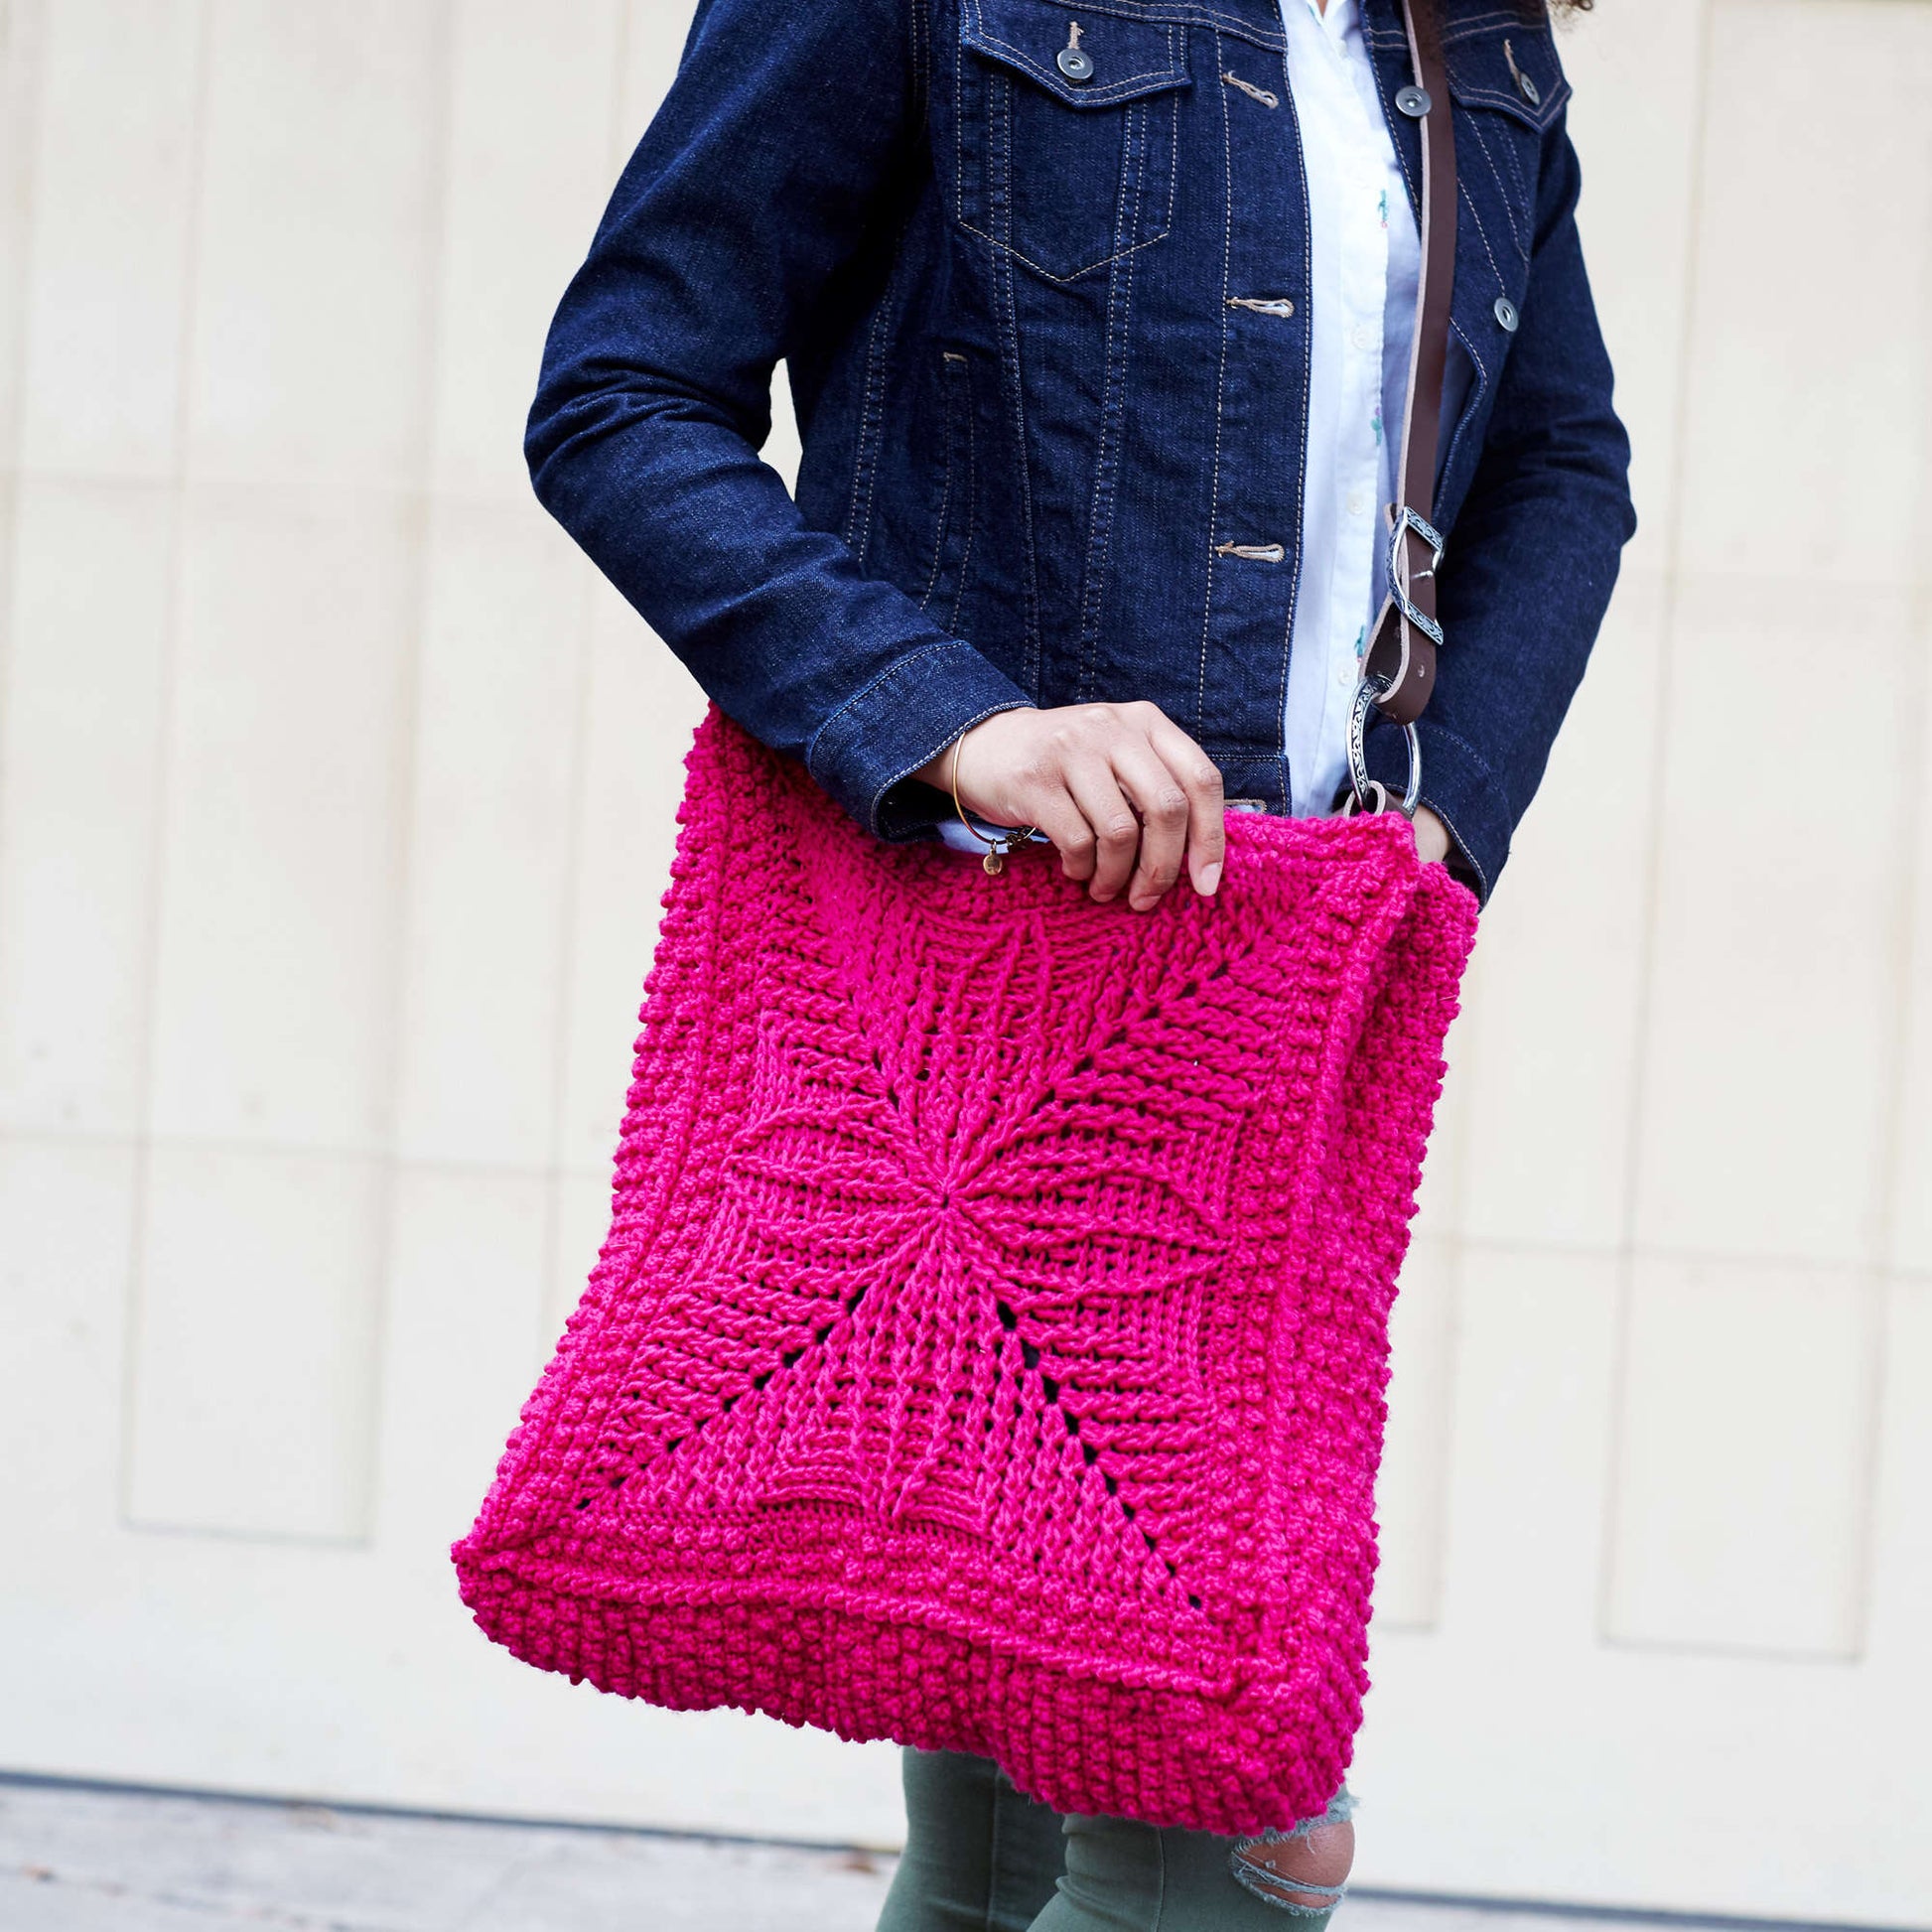 Free Red Heart Chic Carry-all Bag Pattern